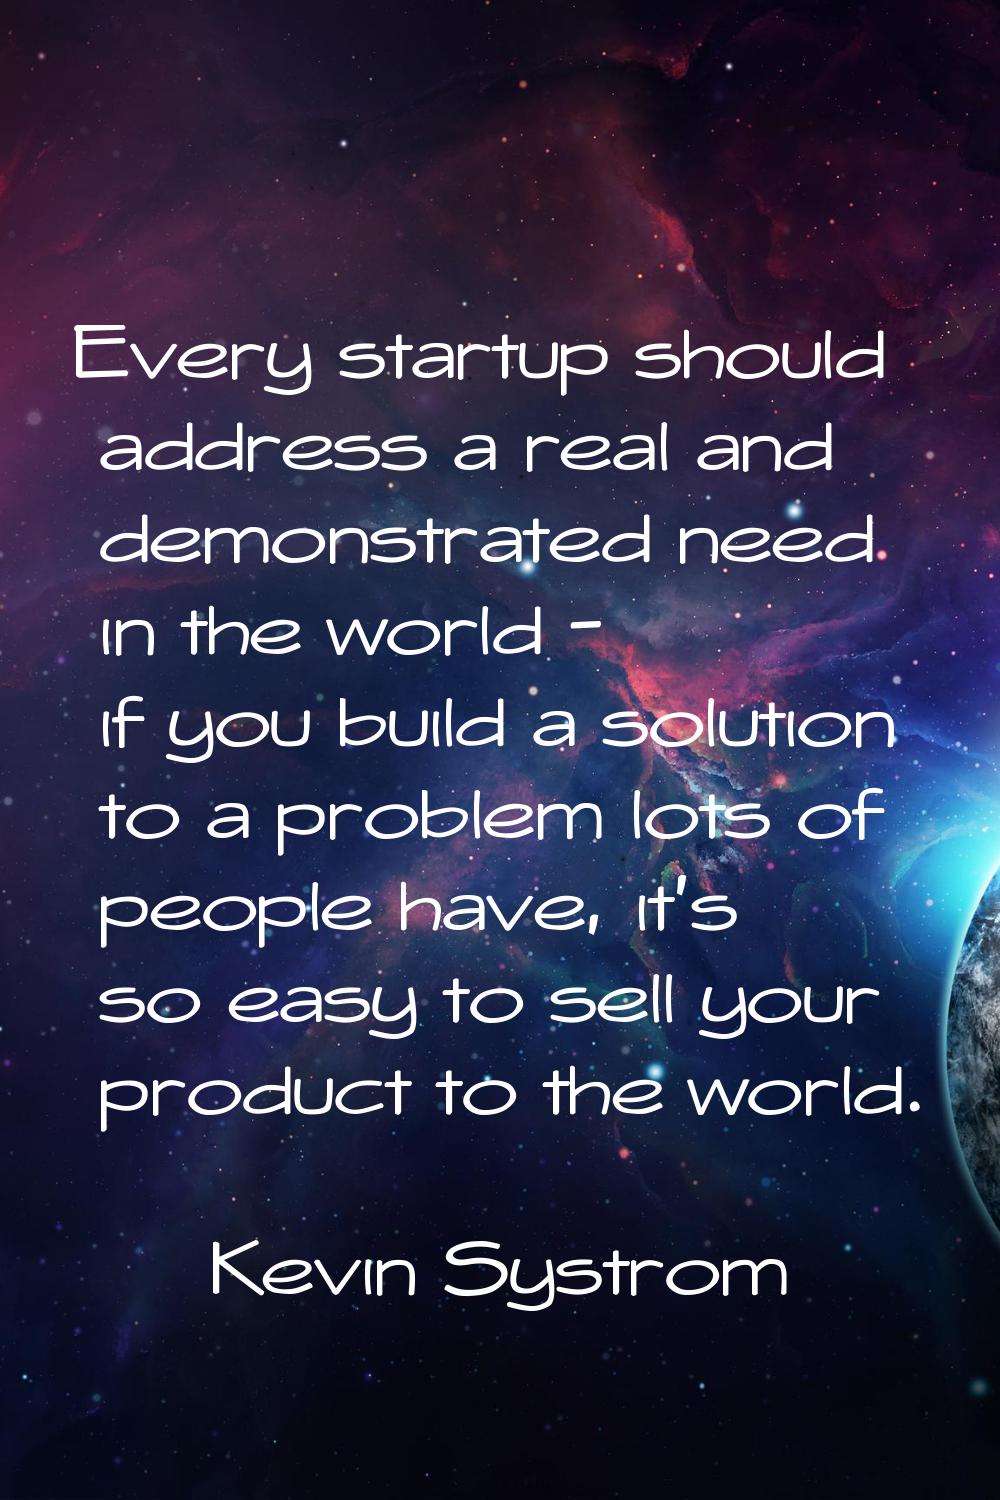 Every startup should address a real and demonstrated need in the world - if you build a solution to